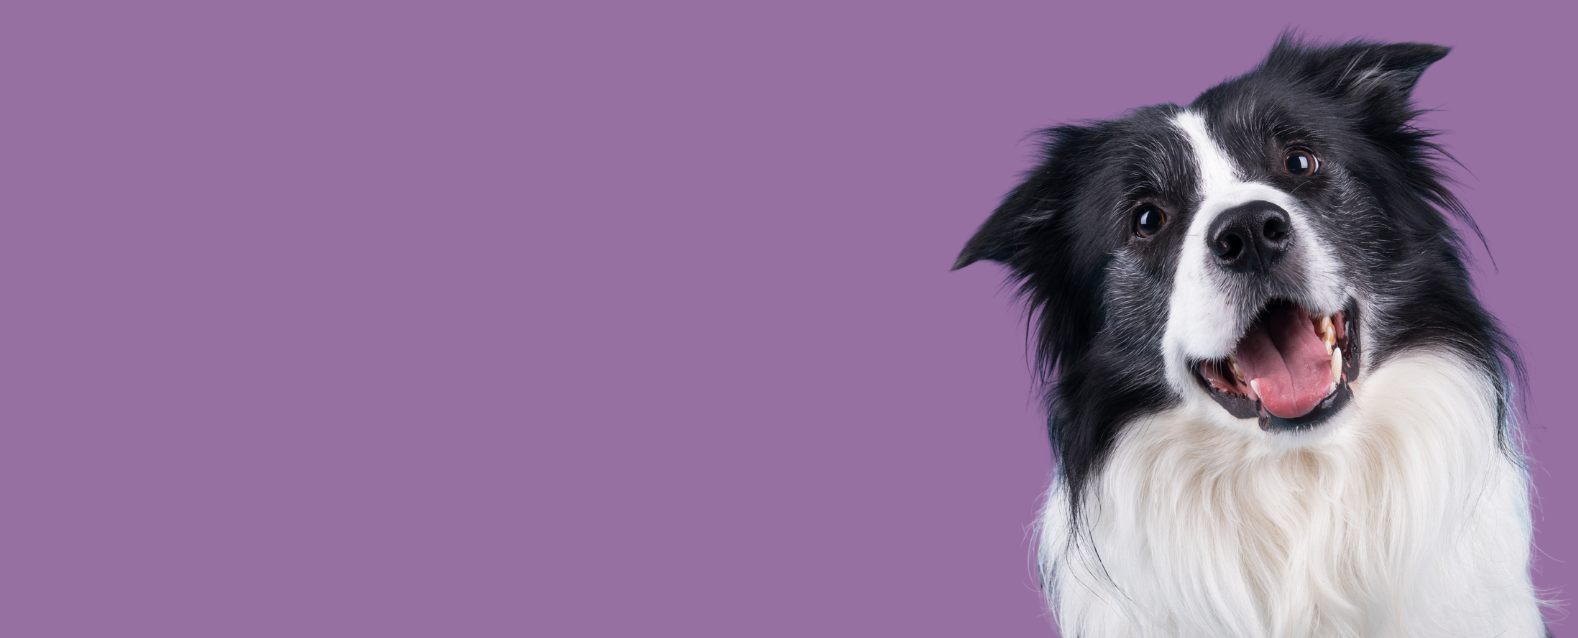 Border Collie on a purple background